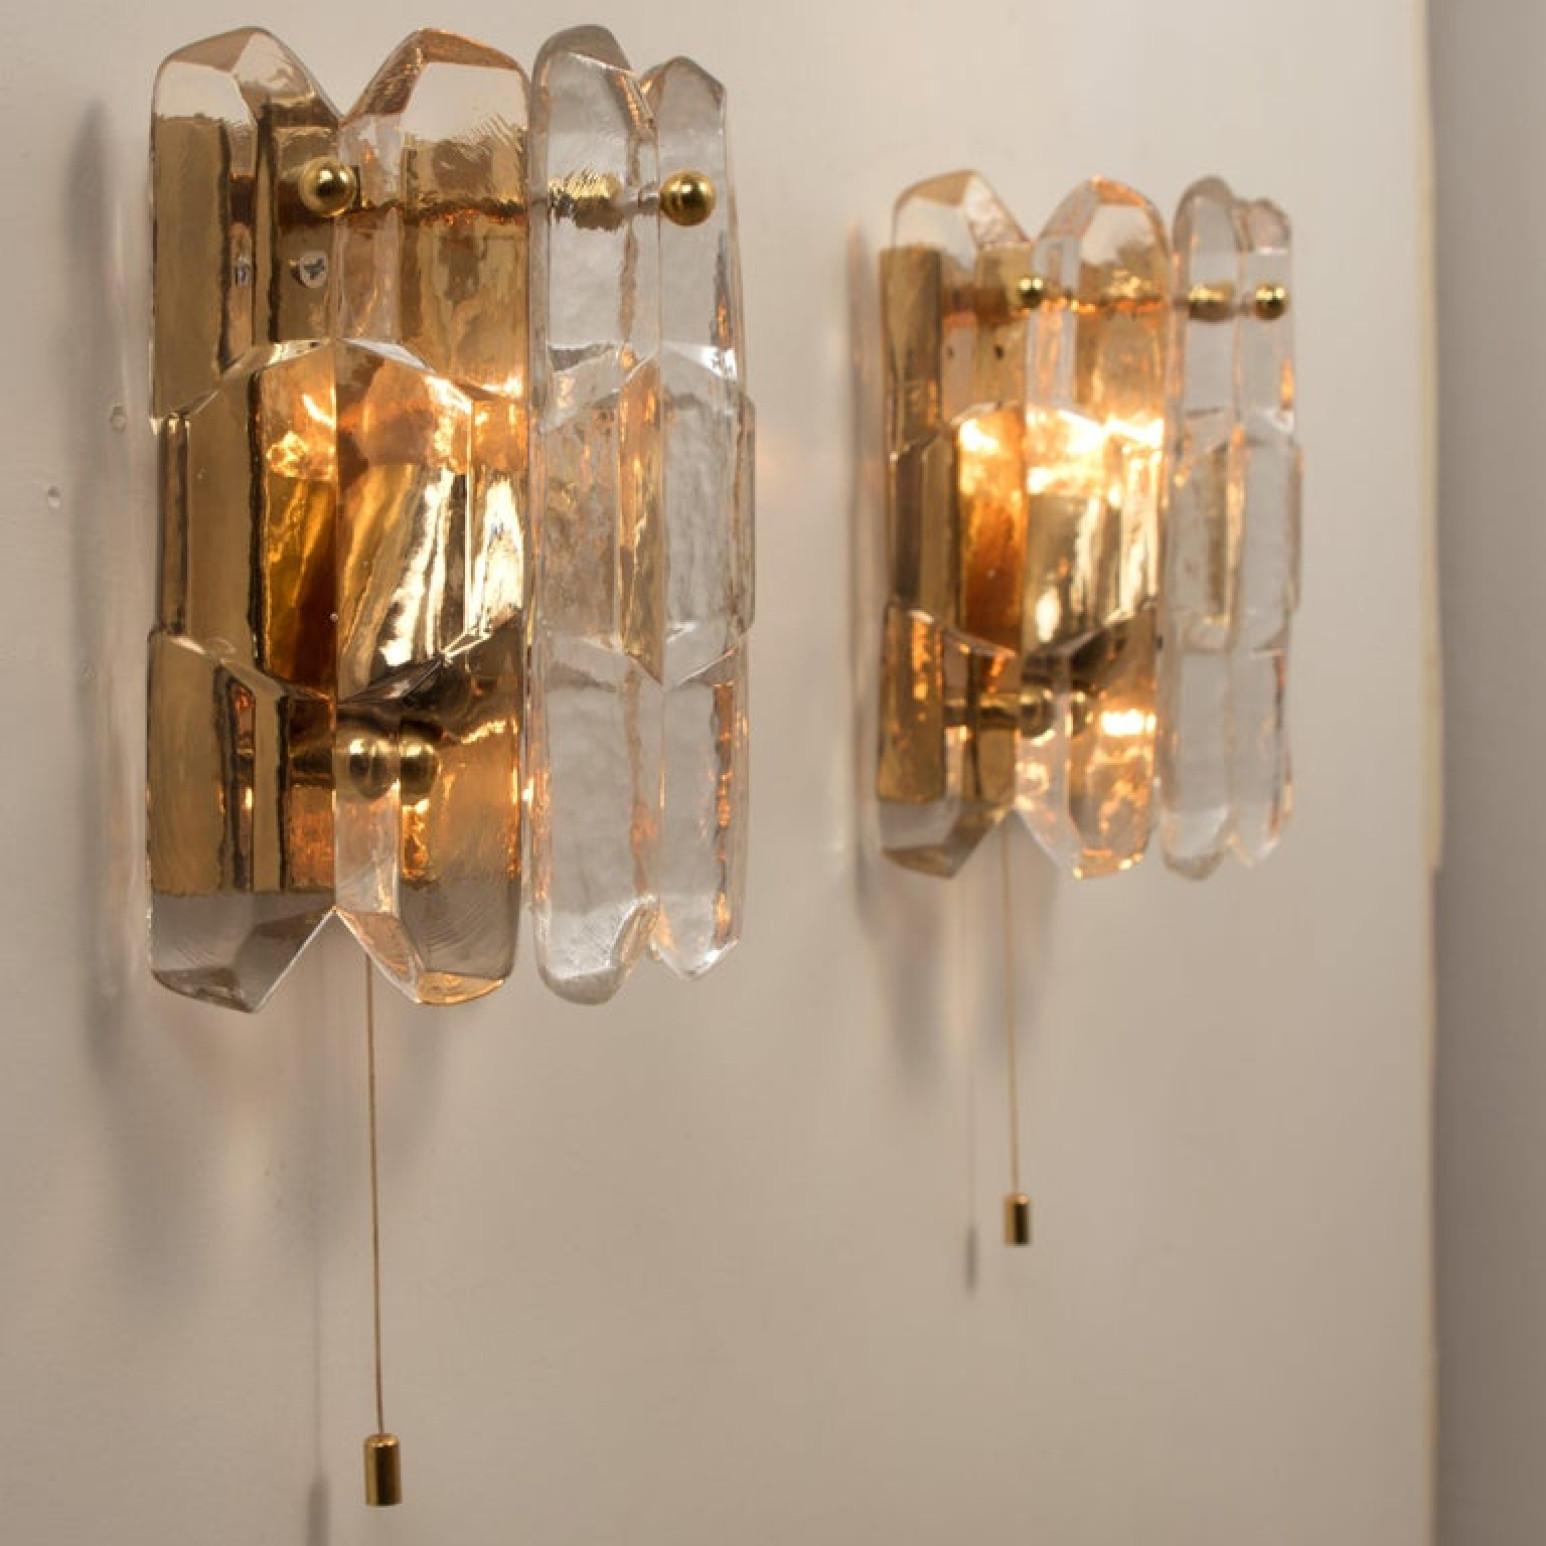 Mid-Century Modern 1 of 2 Pair of J.T. Kalmar 'Palazzo' Wall Light Fixtures Gilt Brass and Glass For Sale